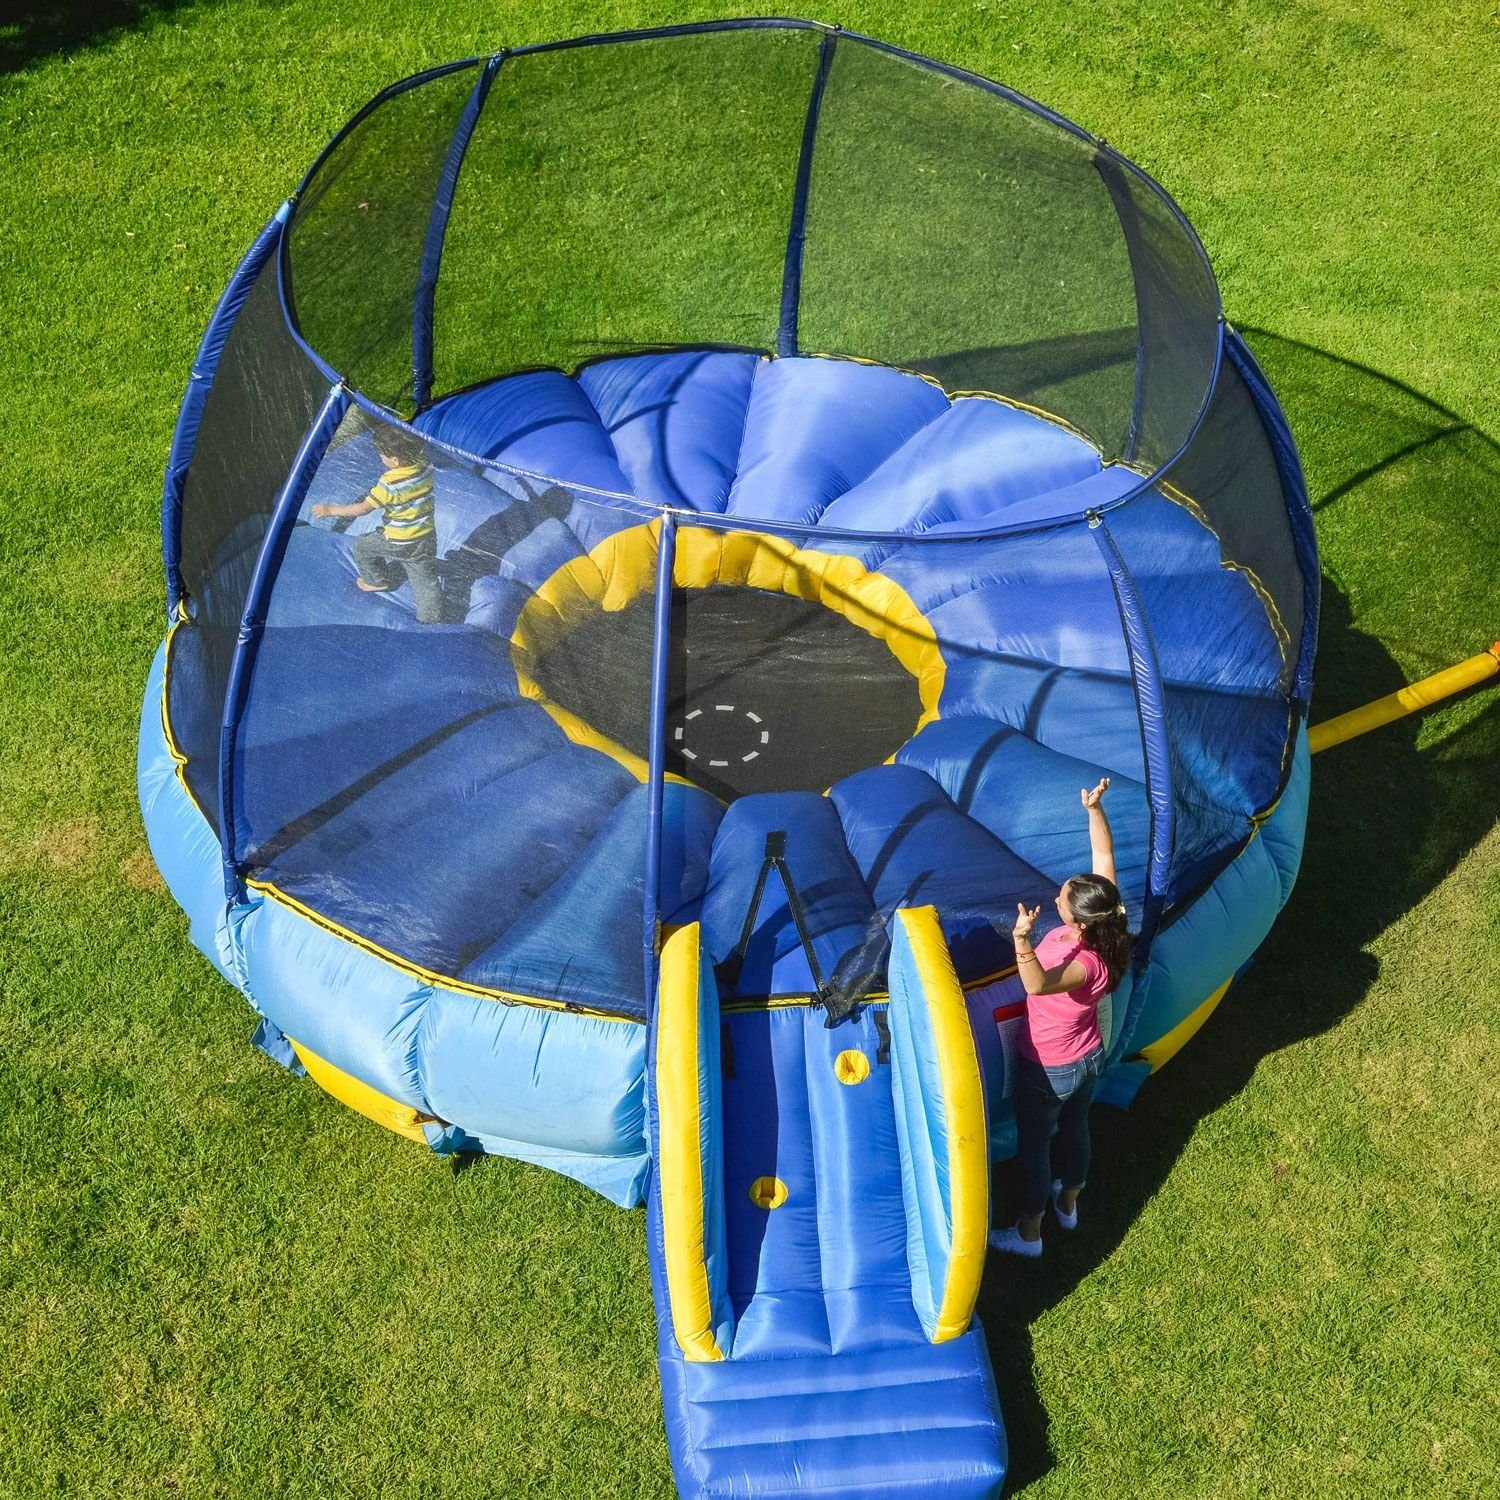 BouncePro Superdome Trampoline and Bouncer Inflated Air Bounce House